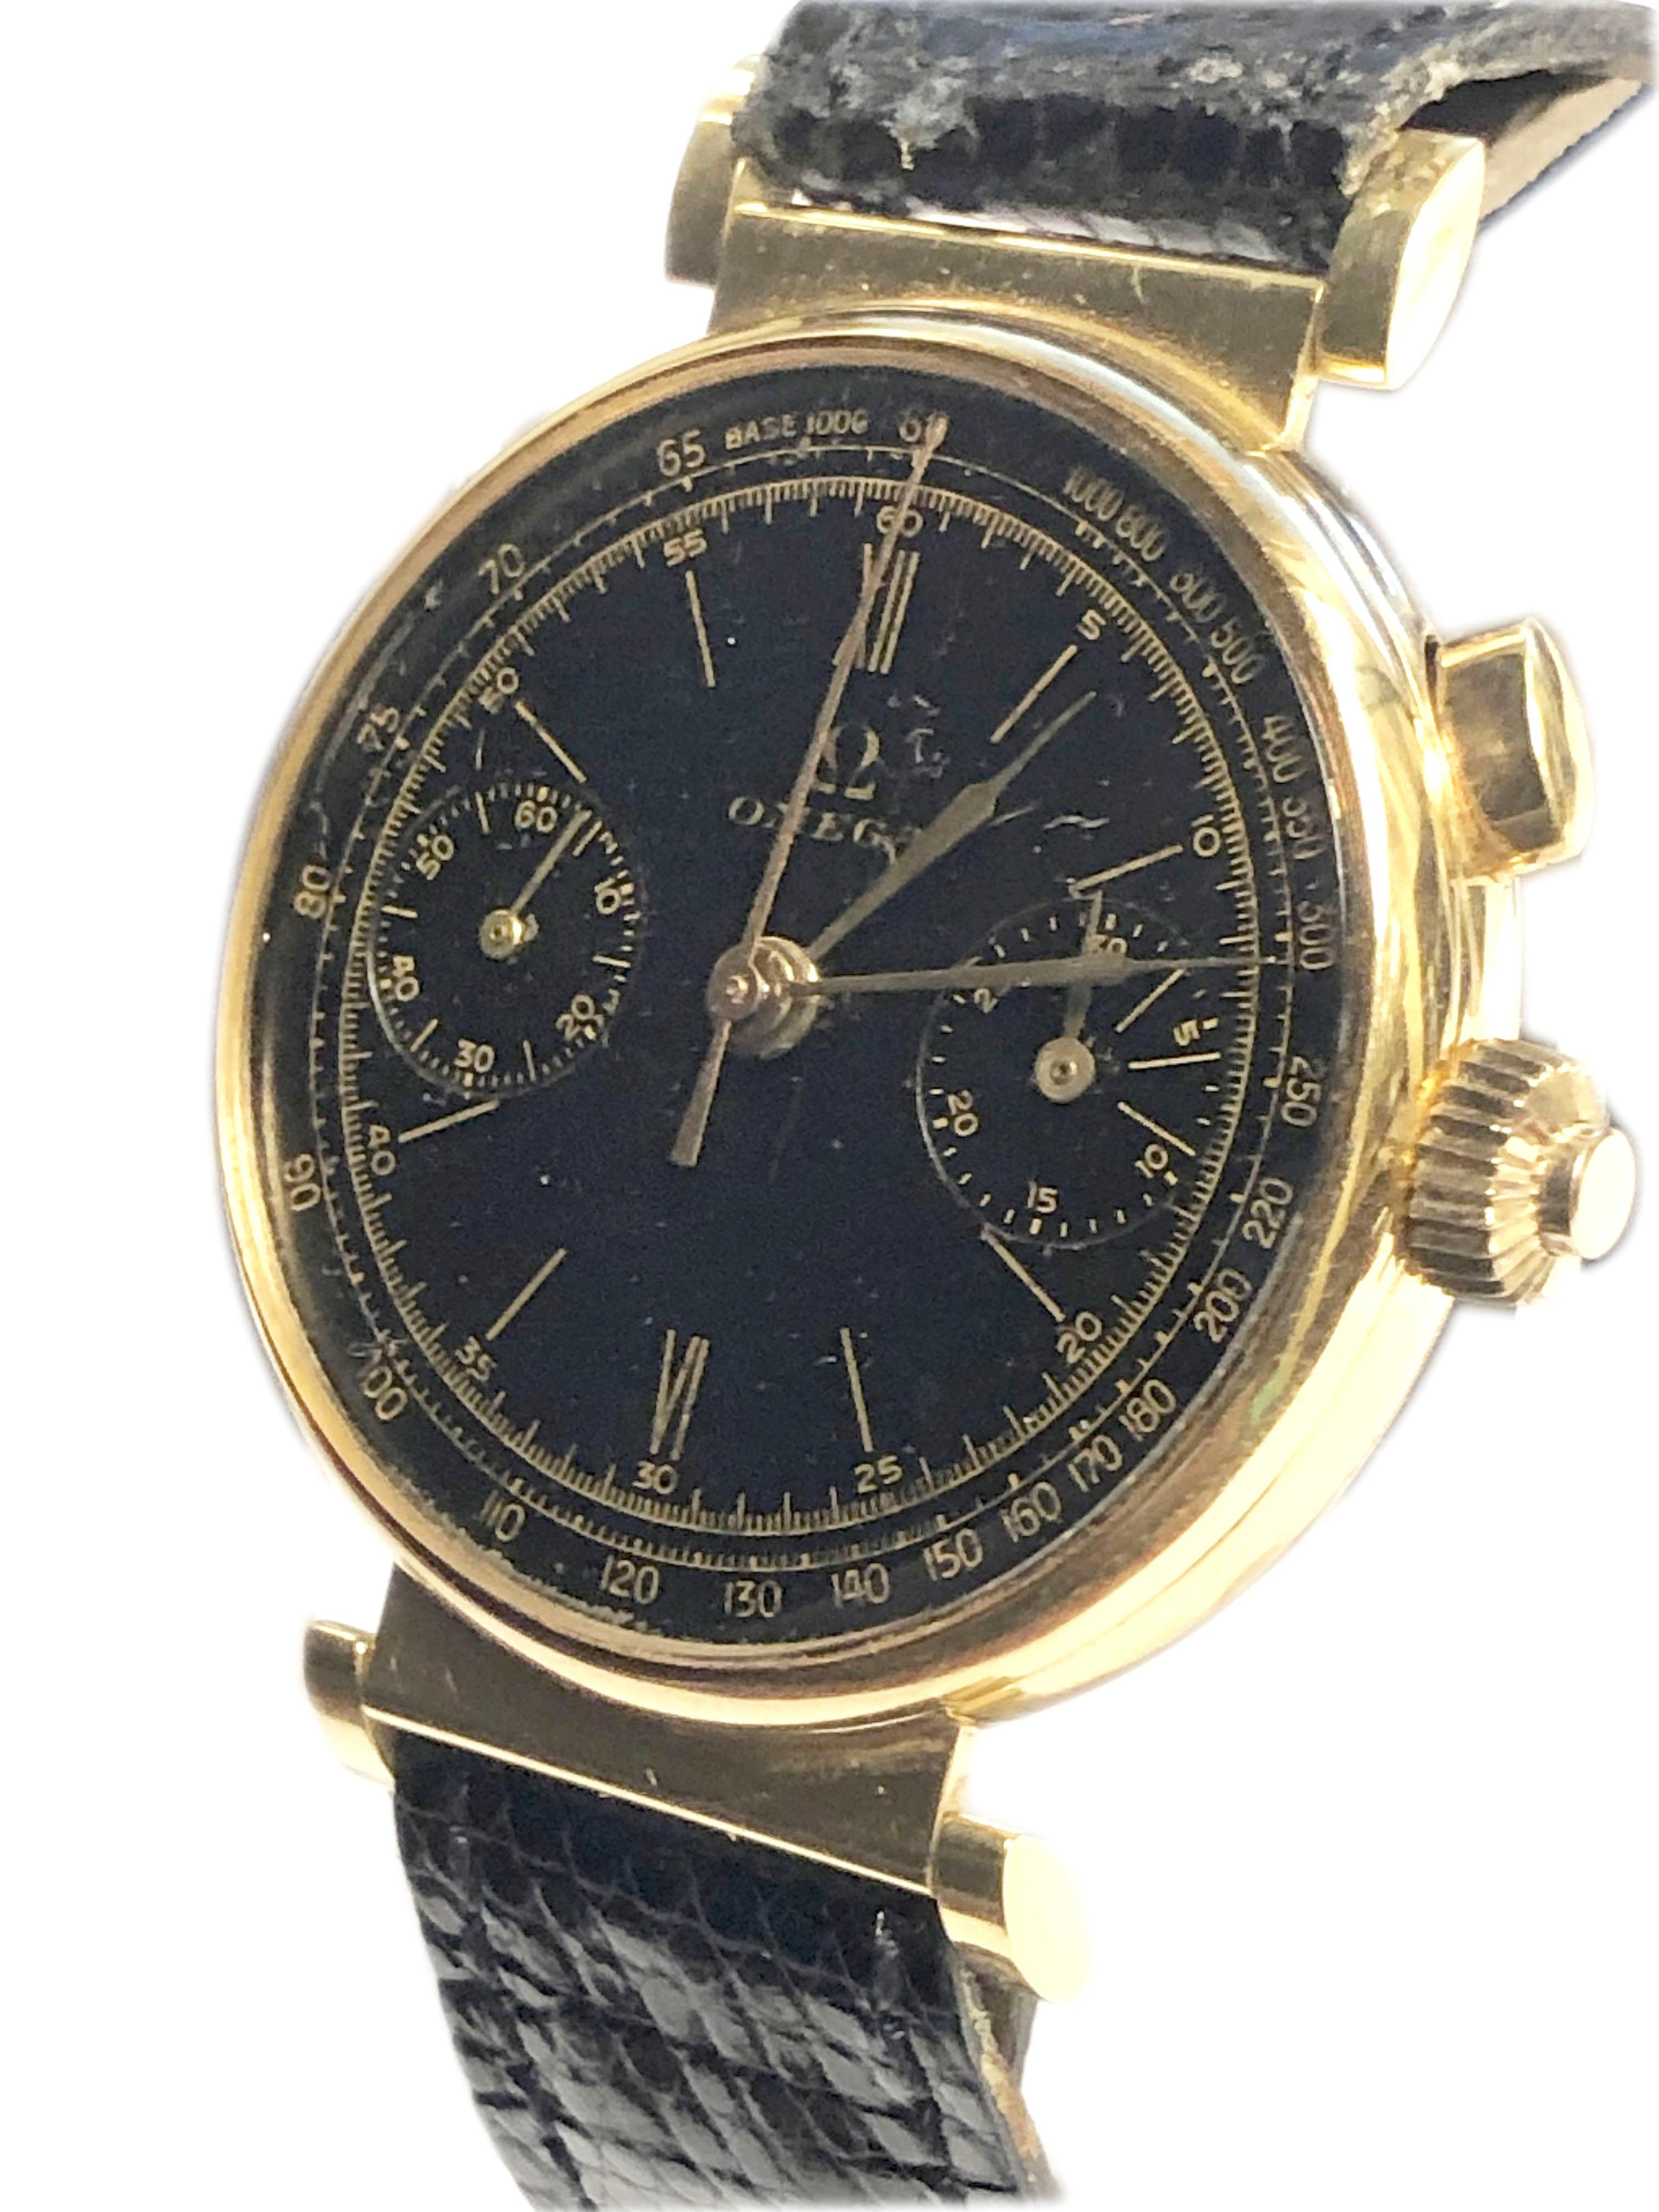 Circa 1930s Omega Chronograph Wrist Watch, 18K Rose Gold 37 M.M. 3 piece signed Omega case with flexible lugs. 17 Jewel Nickle and Gilt lever movement, 2 Register Chronograph functions operated by a single button with Fly back function operated by a